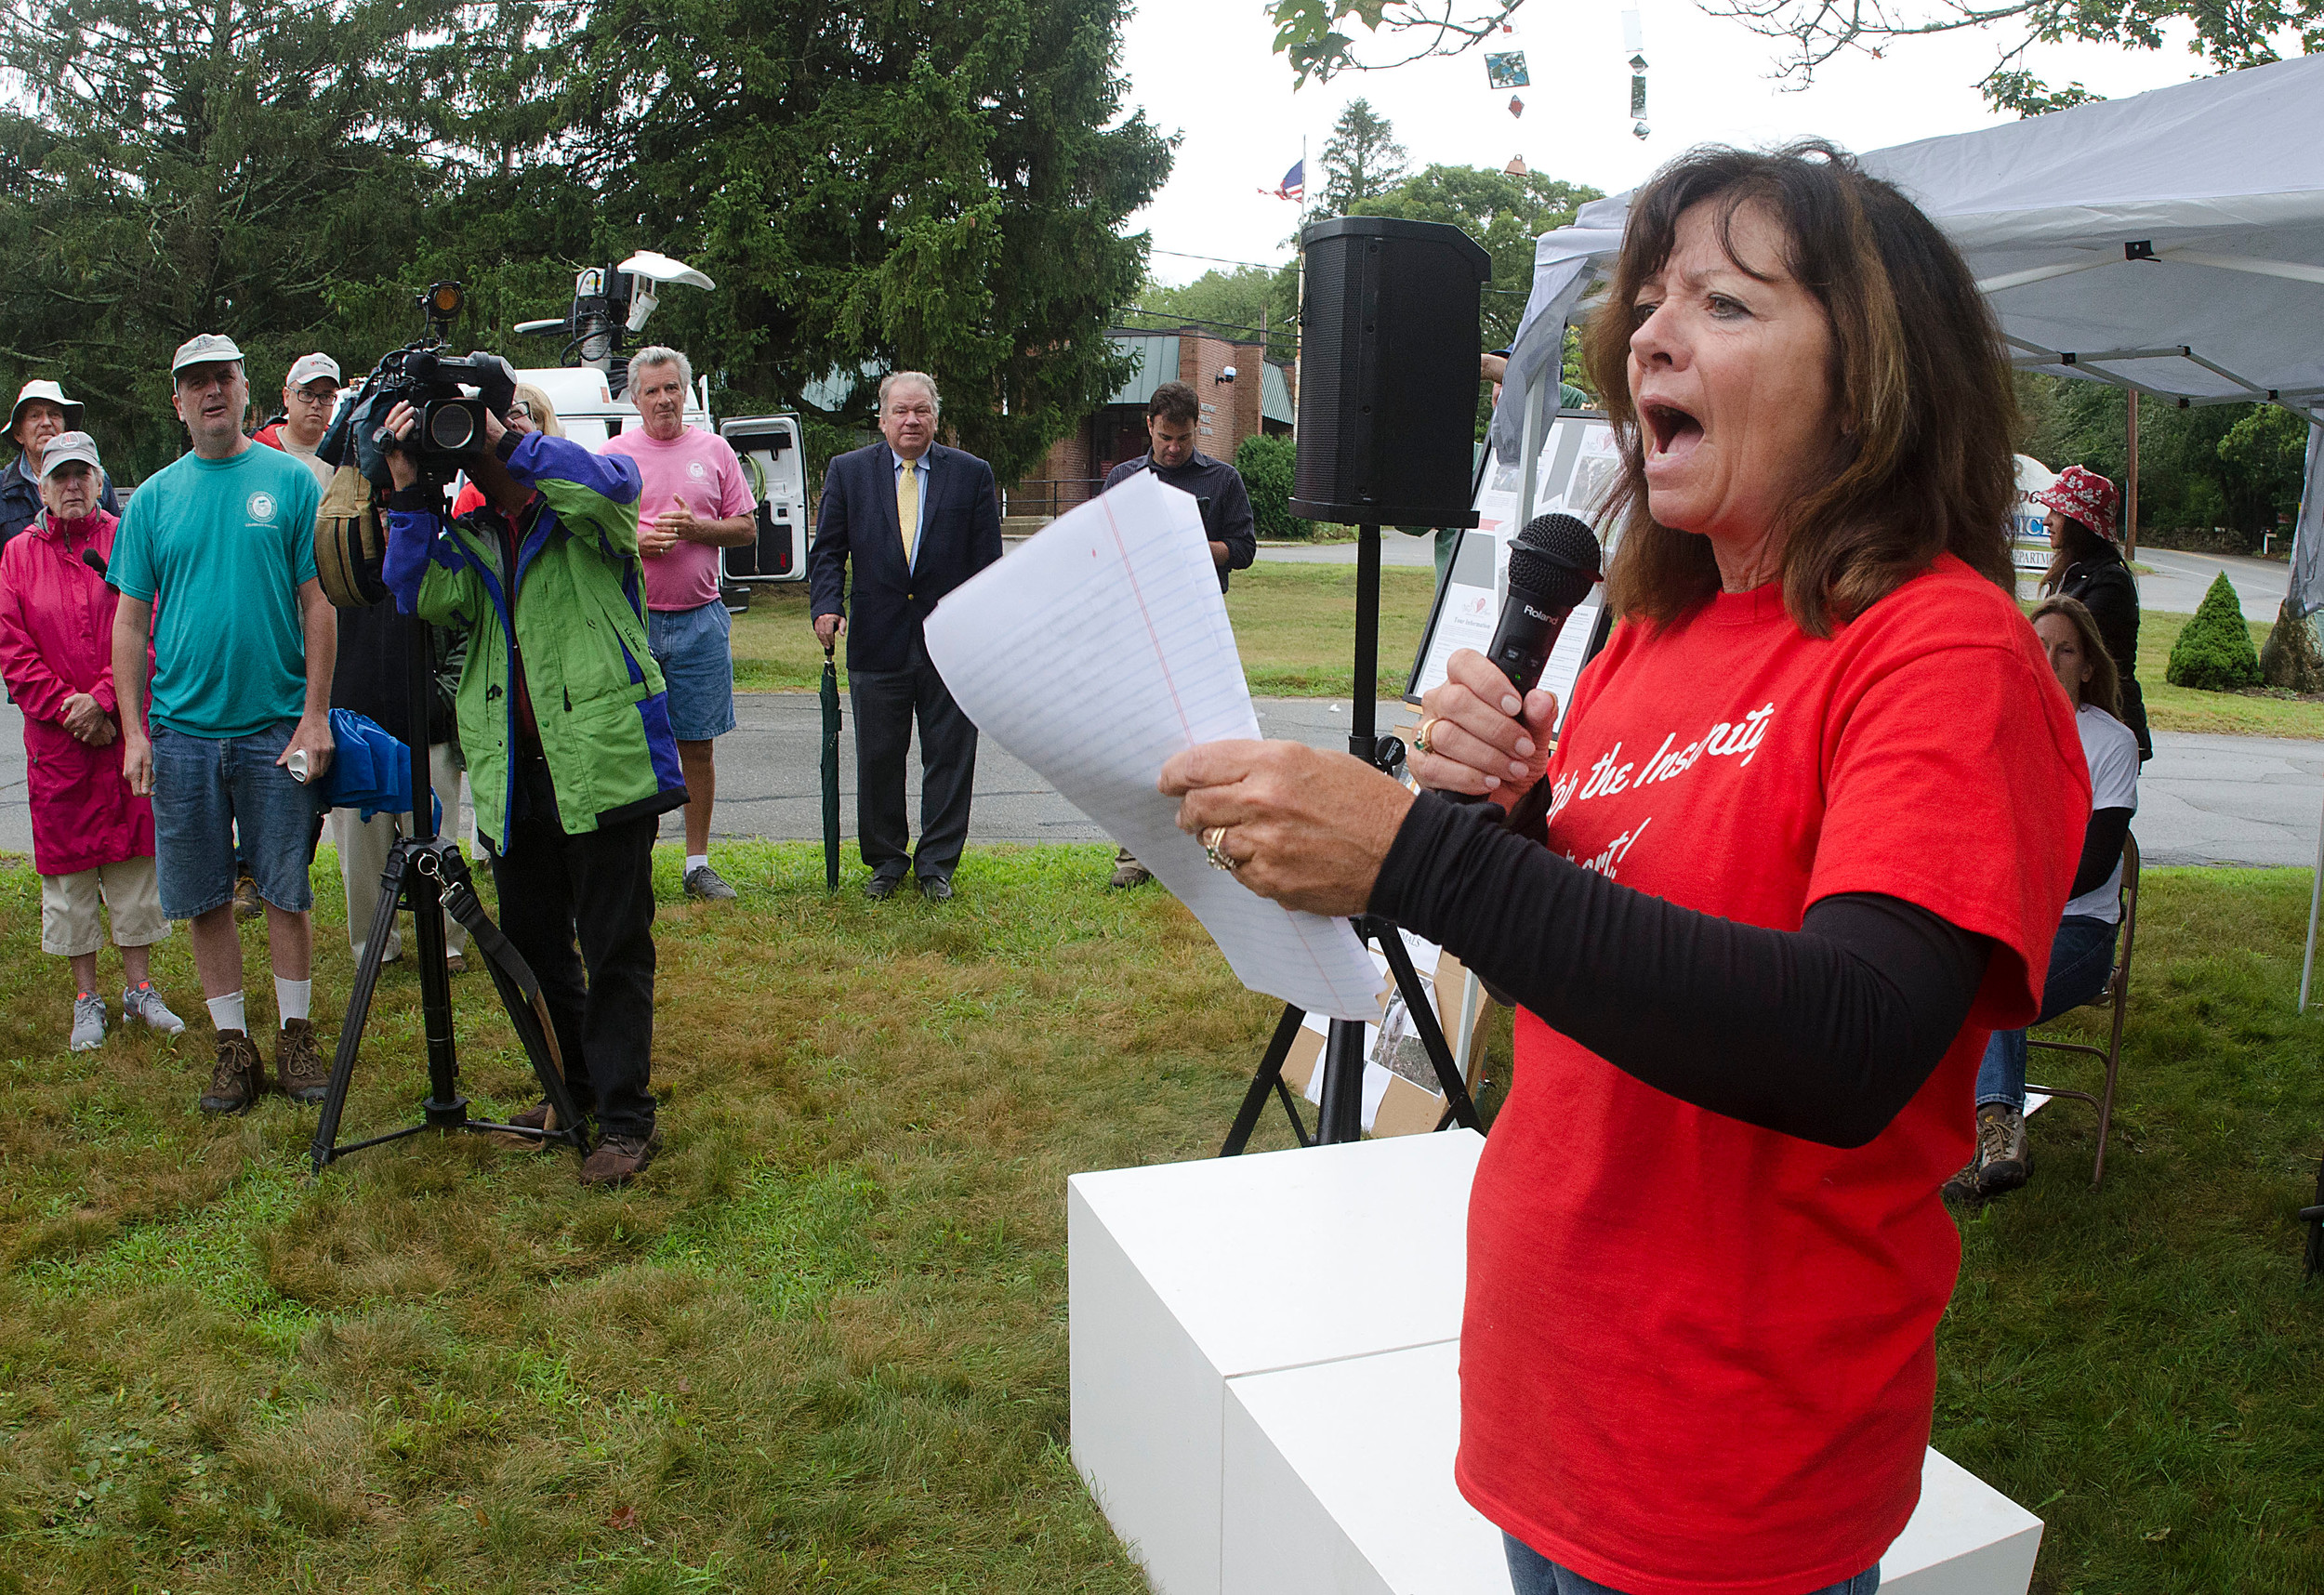 Barbara Pontolilo of Stop the Insanity, Westport speaks at an animal abuse rally in front of Westport Town Hall on Monday evening. She told her story of volunteering during the Medeiros tenant farm animal abuse case last year.